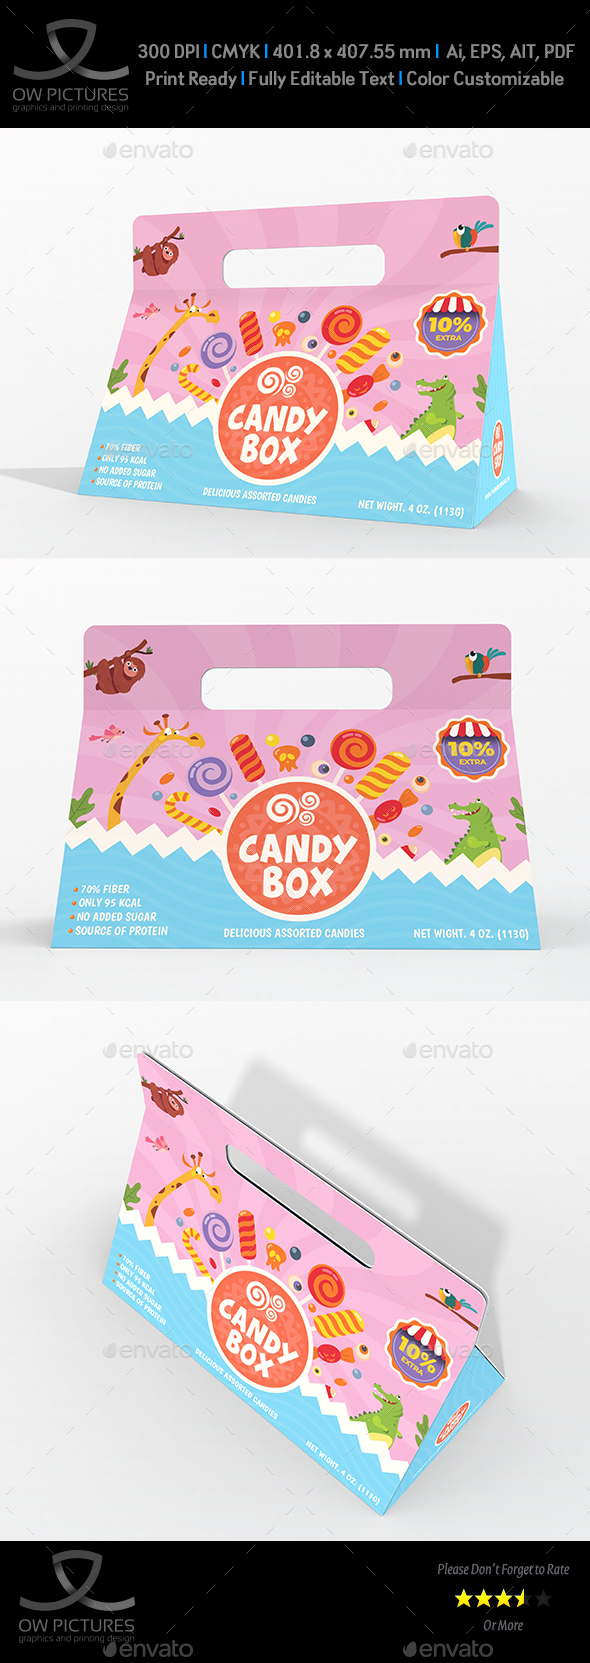 [DOWNLOAD]Candy Box with Handles Packaging Template